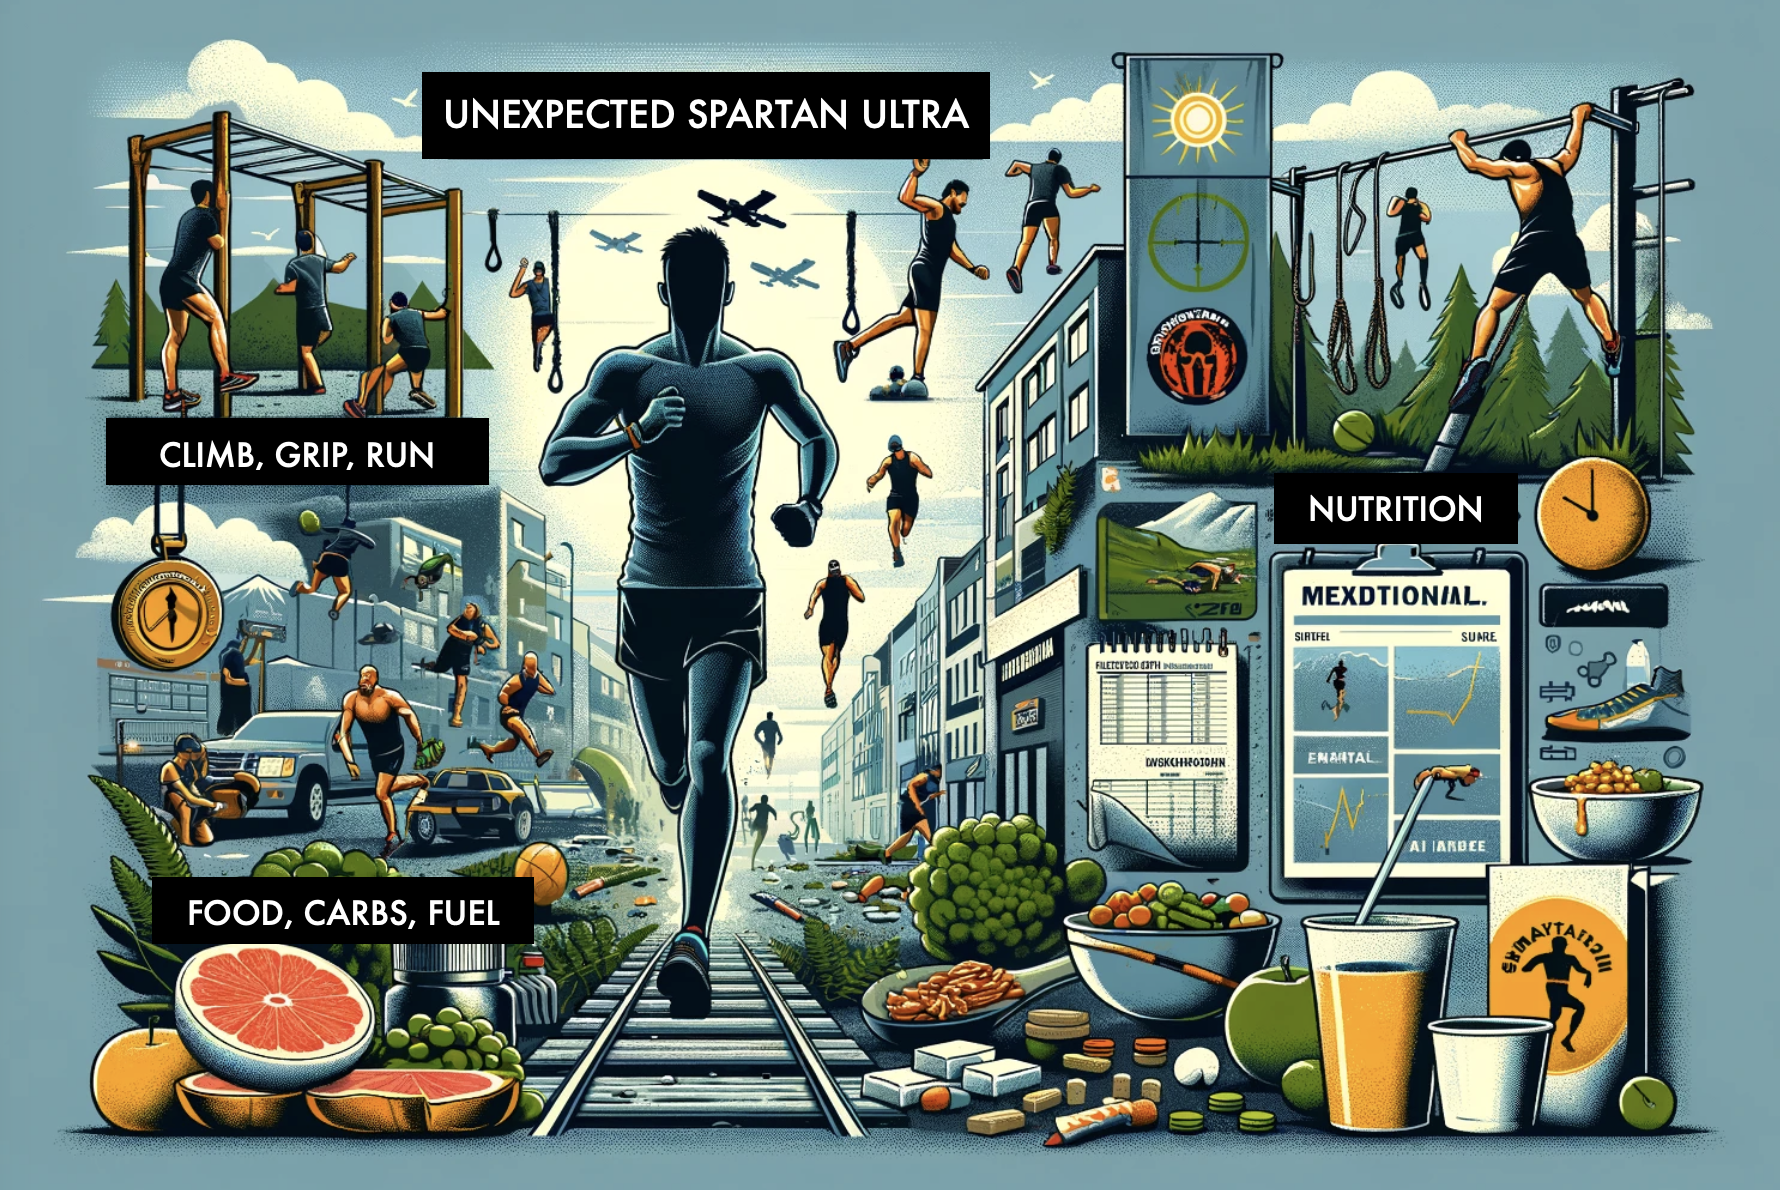 Unexpected Spartan Ultra: Train Up Journey and Lessons Learned